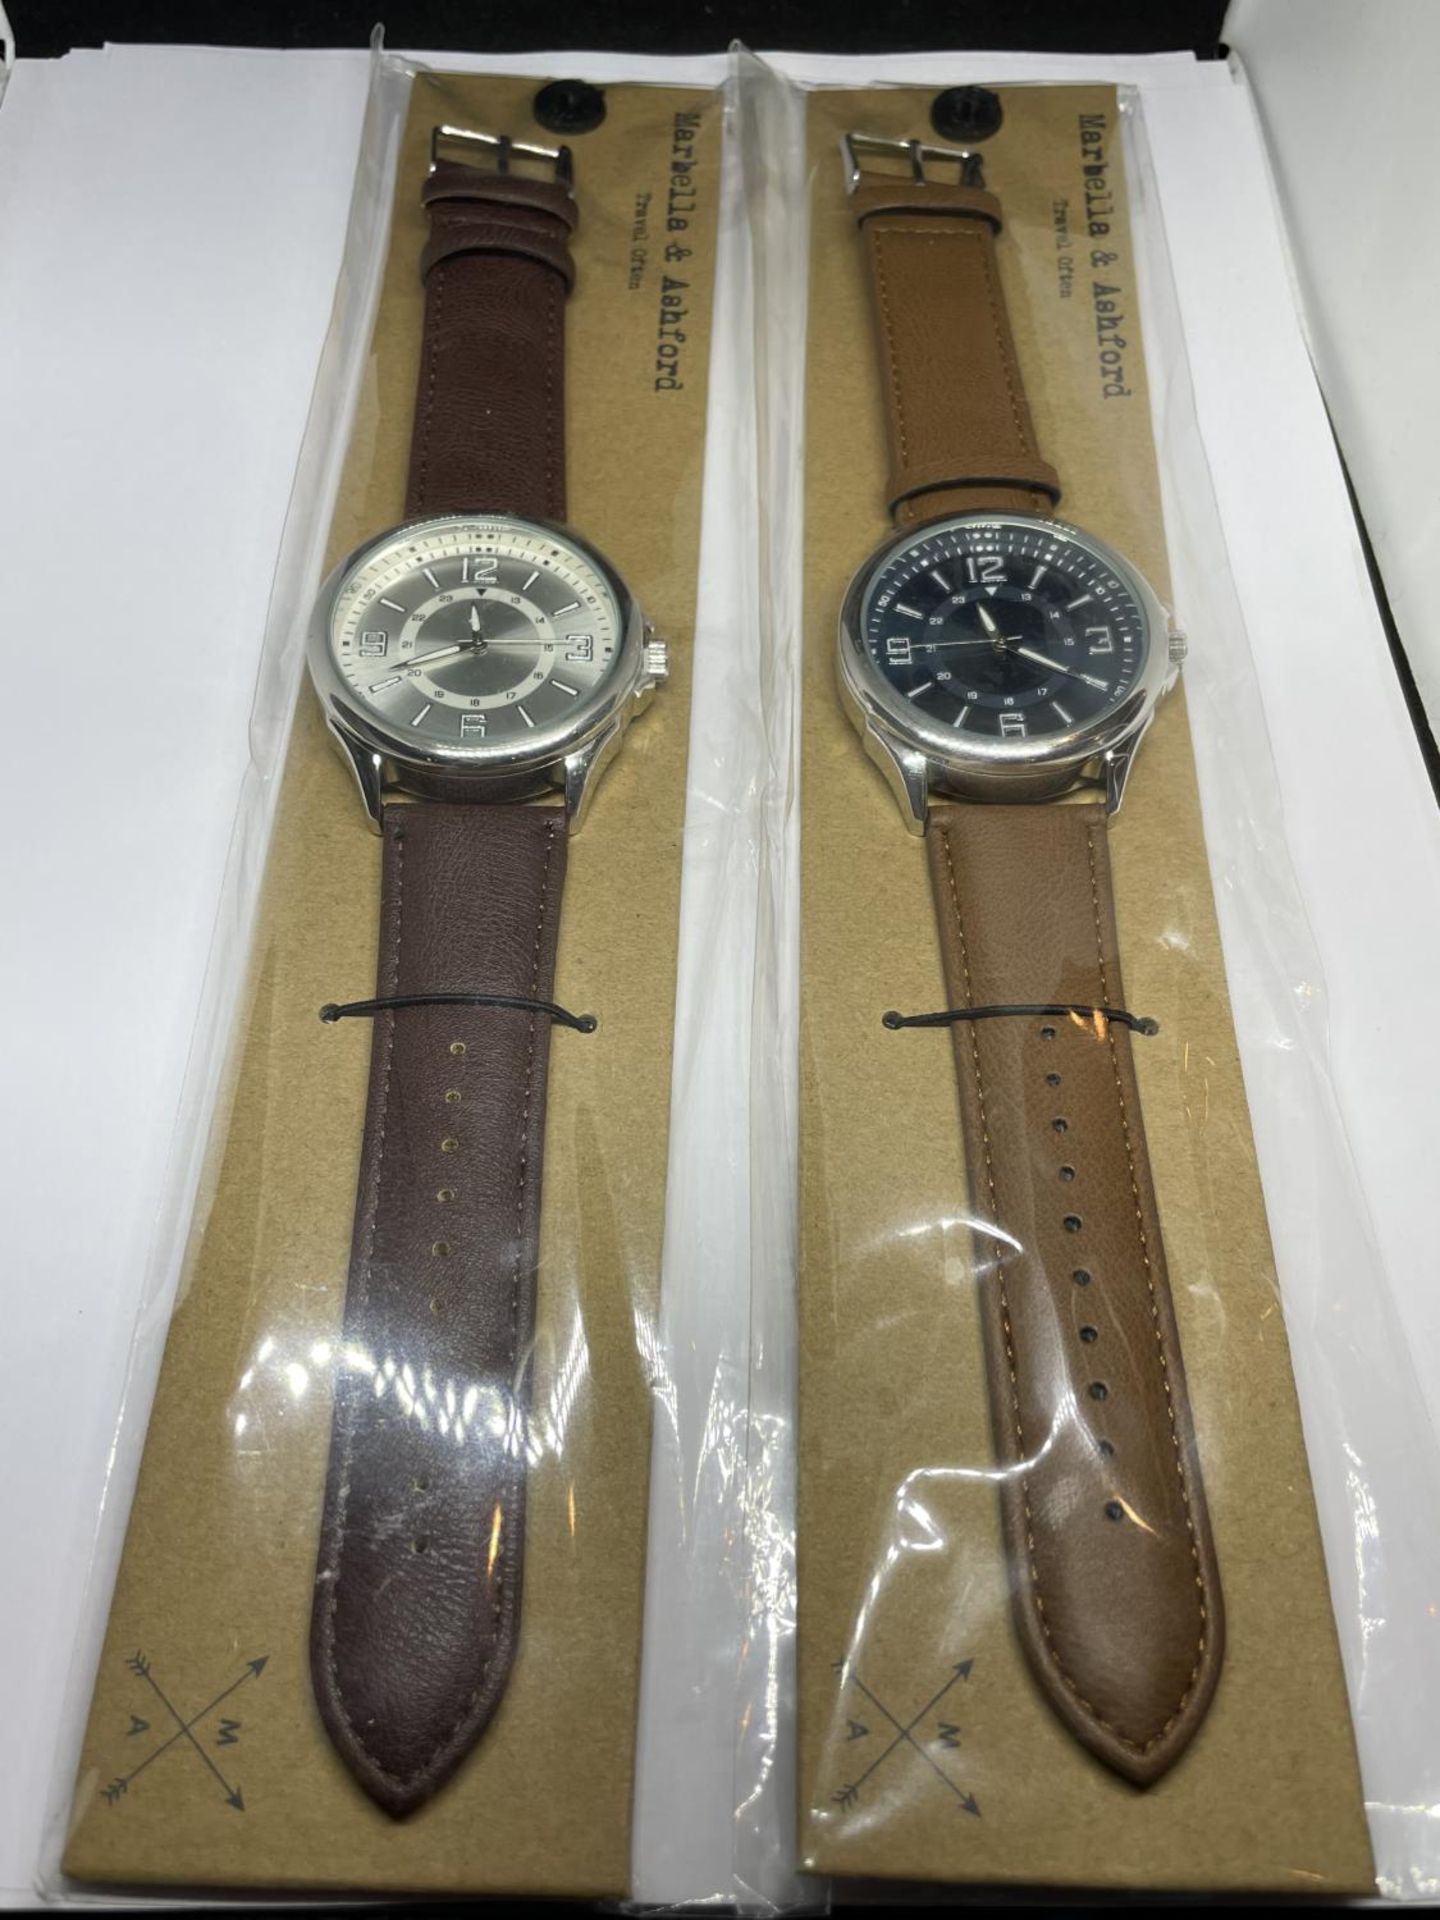 TWO NEW MARBELLA AND ASHFORD WRIST WATCHES